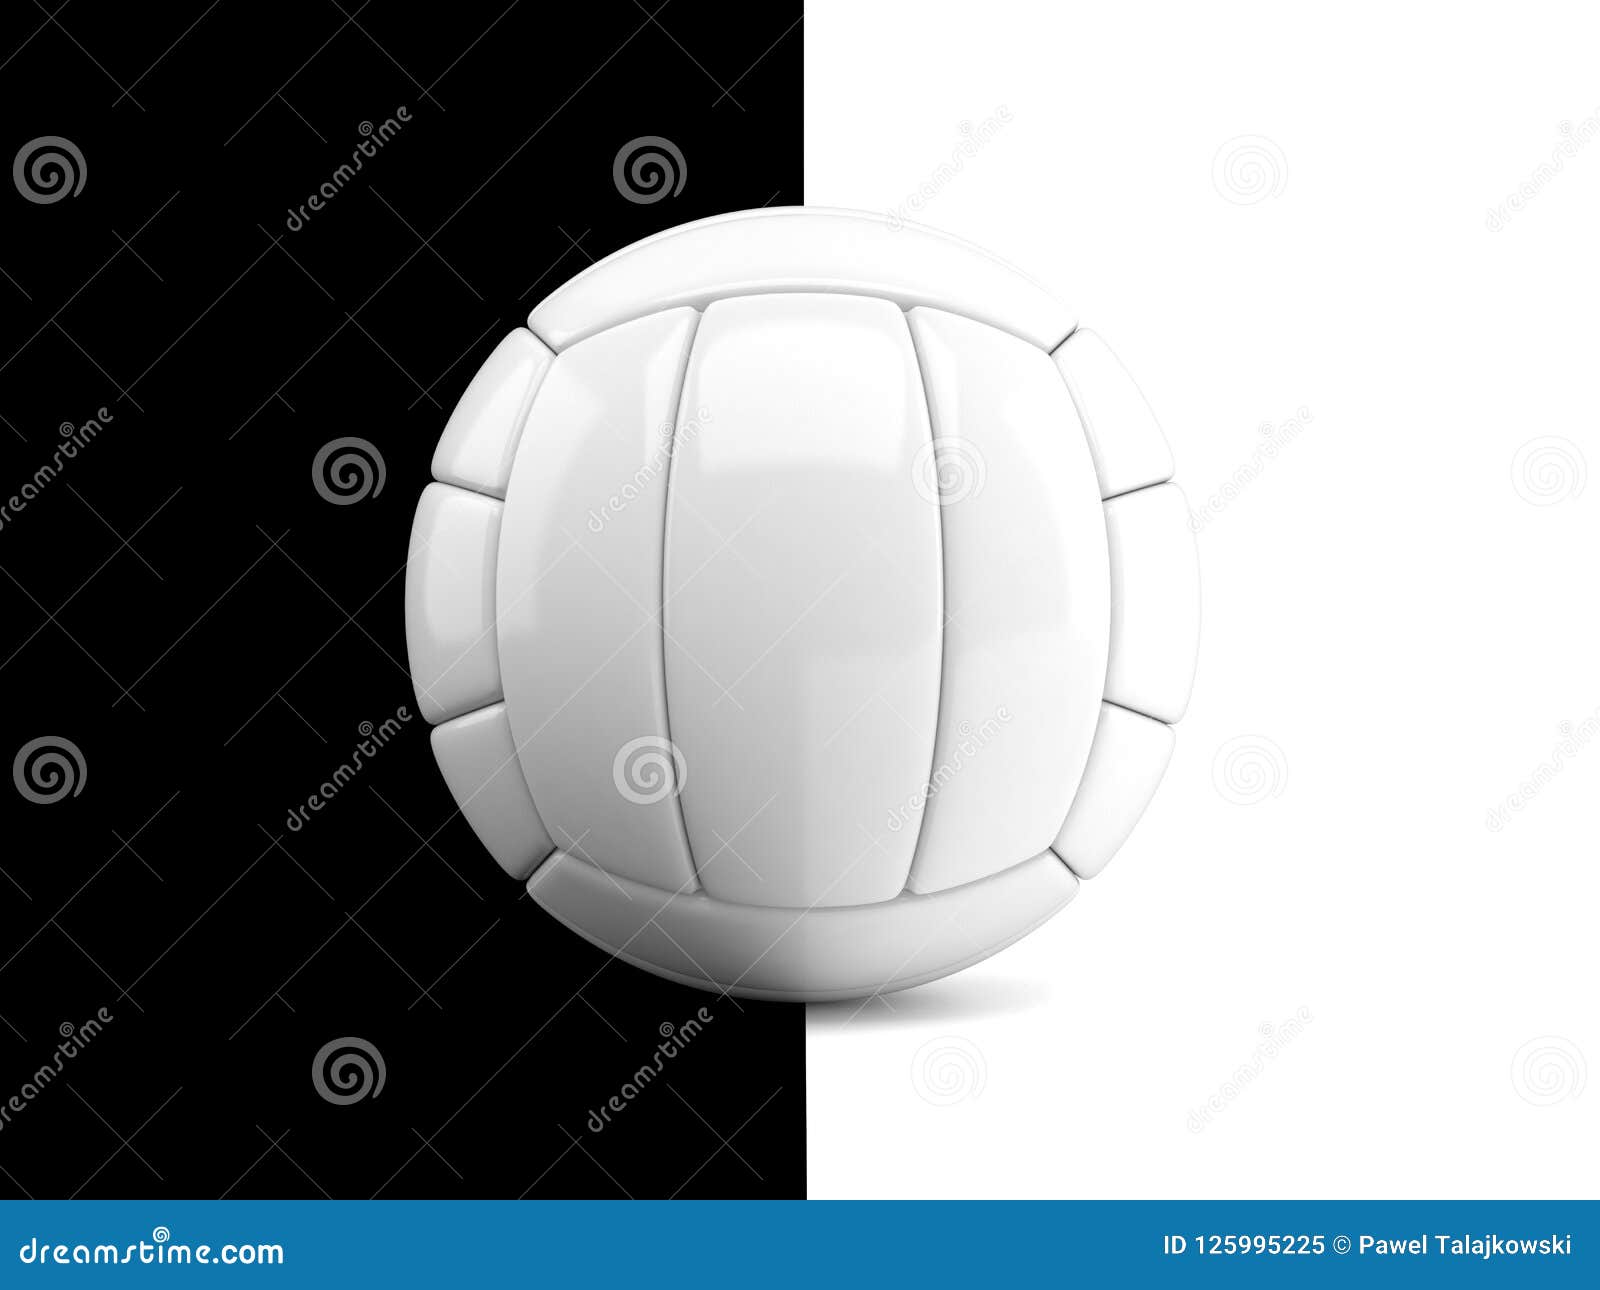 Volleyball on Black and White Background Stock Illustration ...